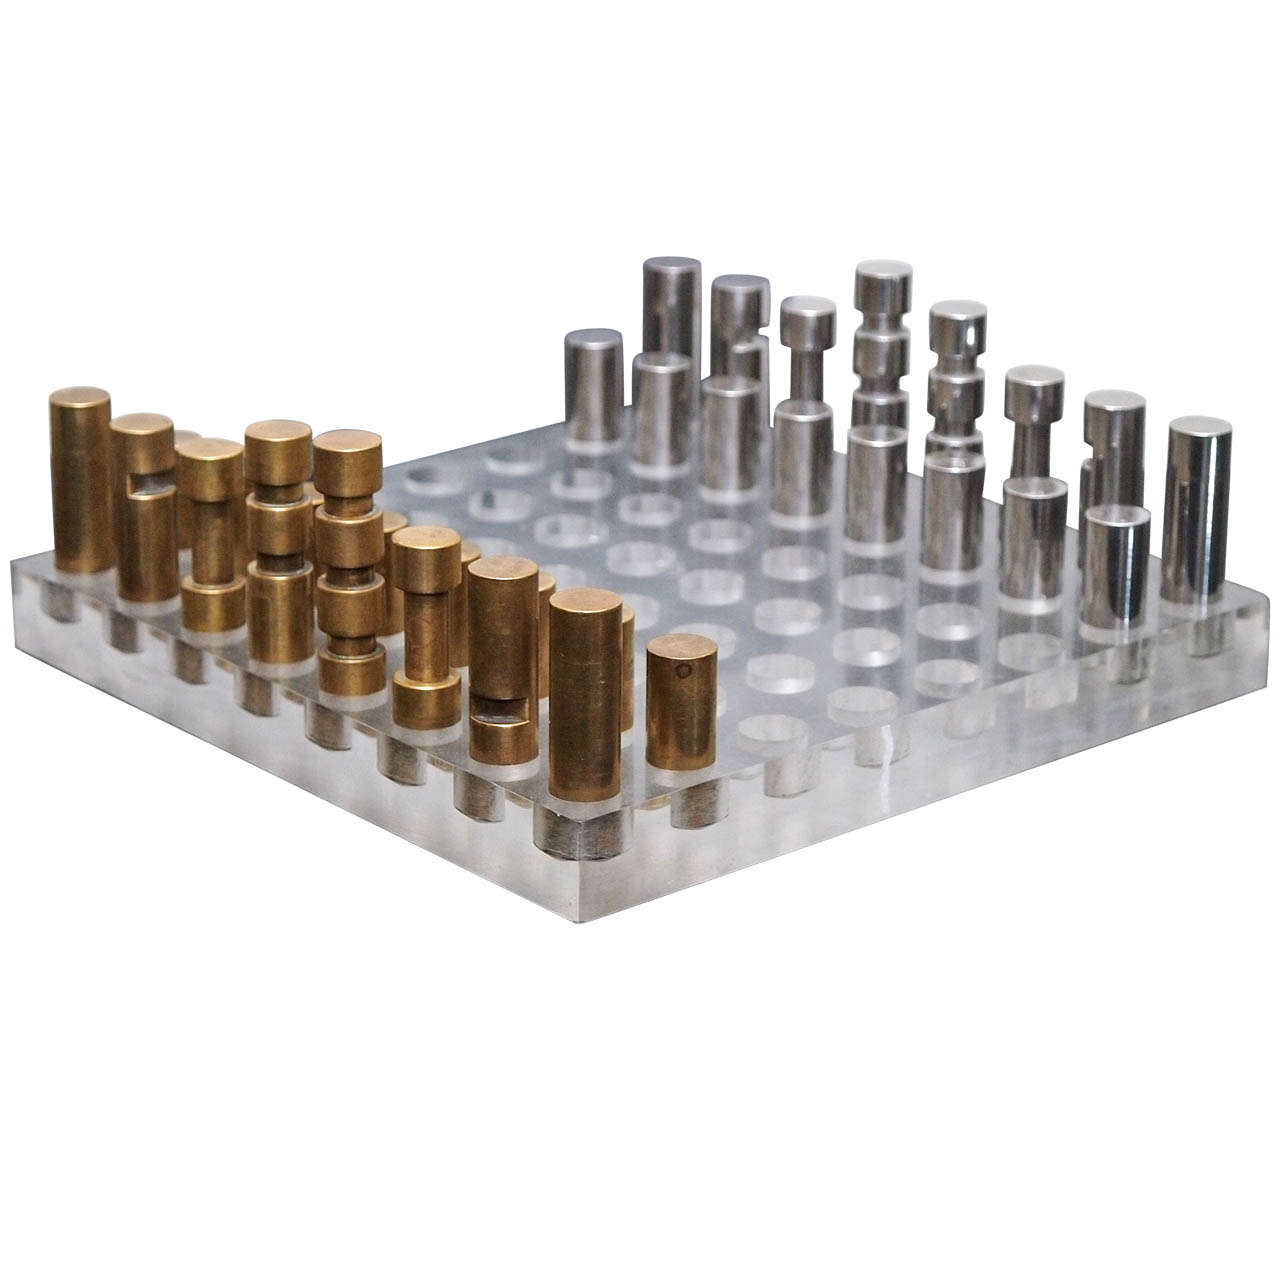 coolest chess set ever